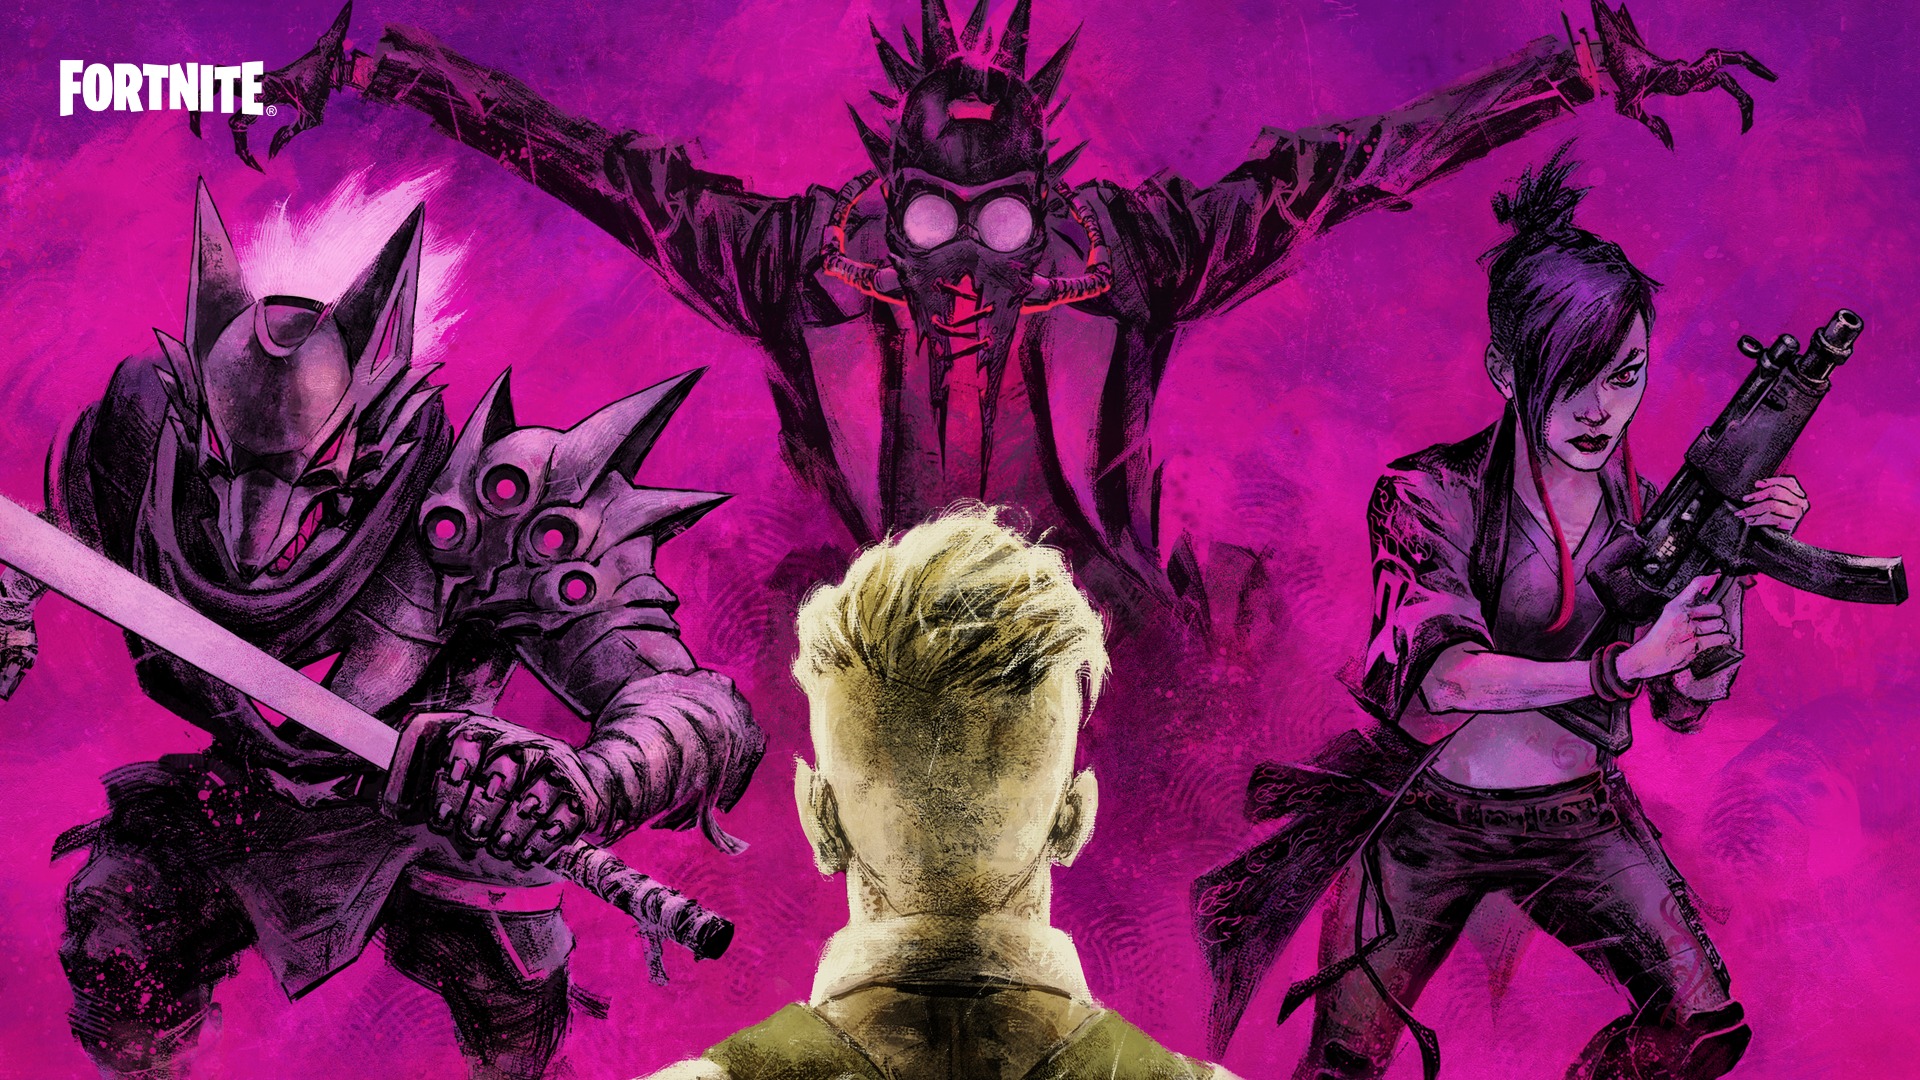 The back of Midas' head looking at three looming figures: a knight in wolf-like armor, a person in a gasmask with a trenchcoat and red tie, and a person wielding an SMG in cyberpunk-style clothing